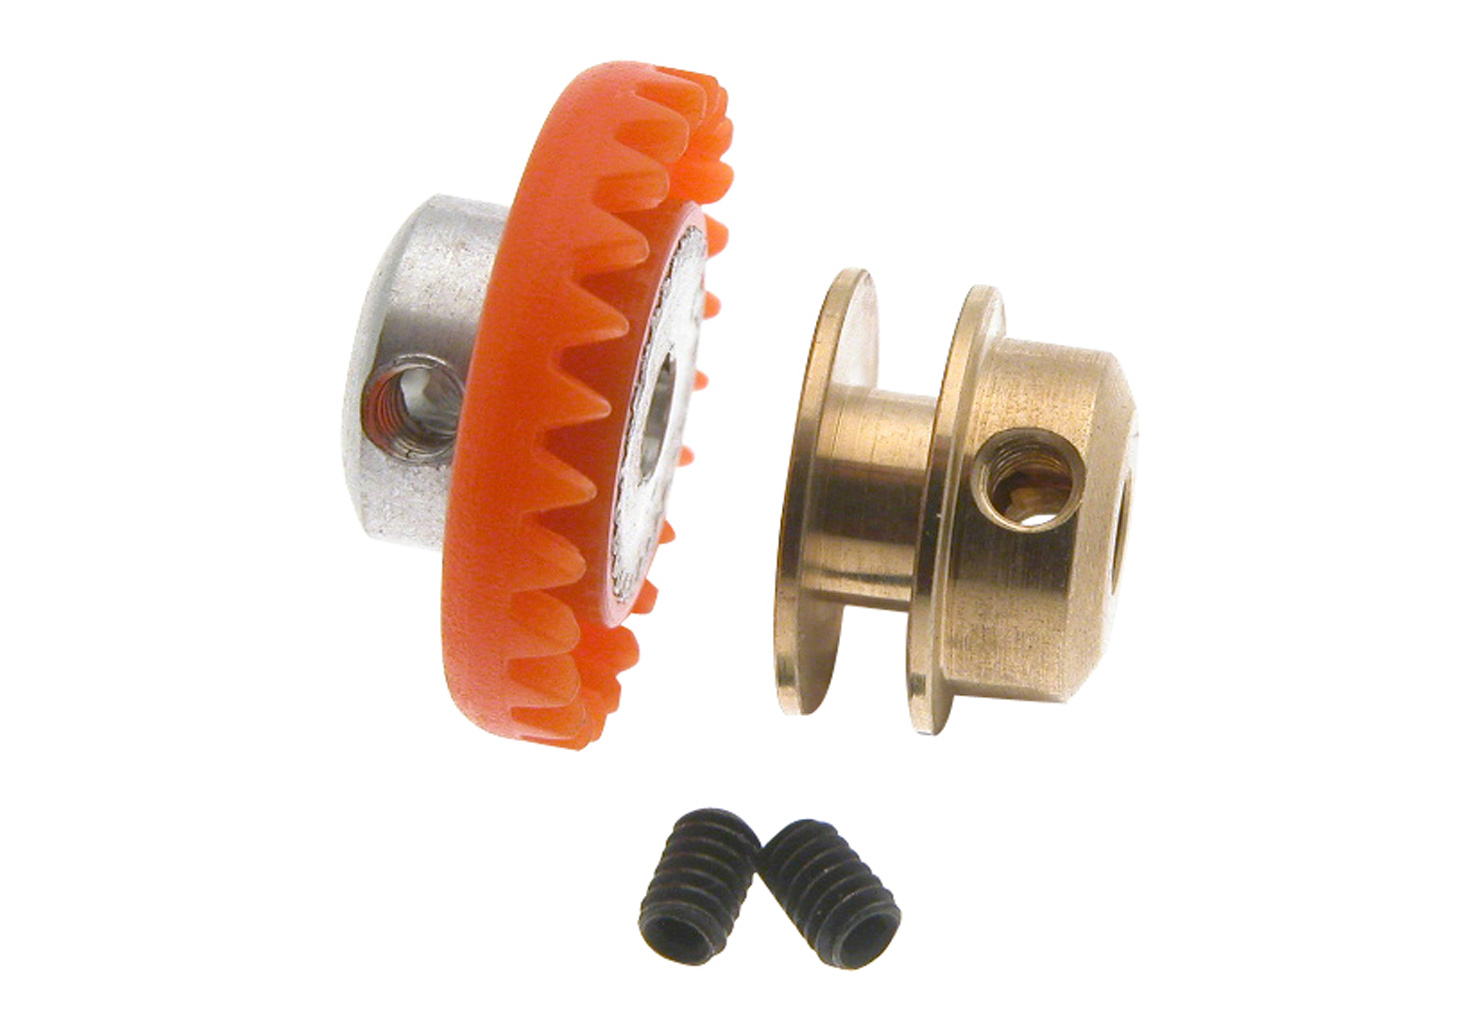 SC-1111 Nylon crown Gear 25t. M50 with M2 screw for 3/32" axle -